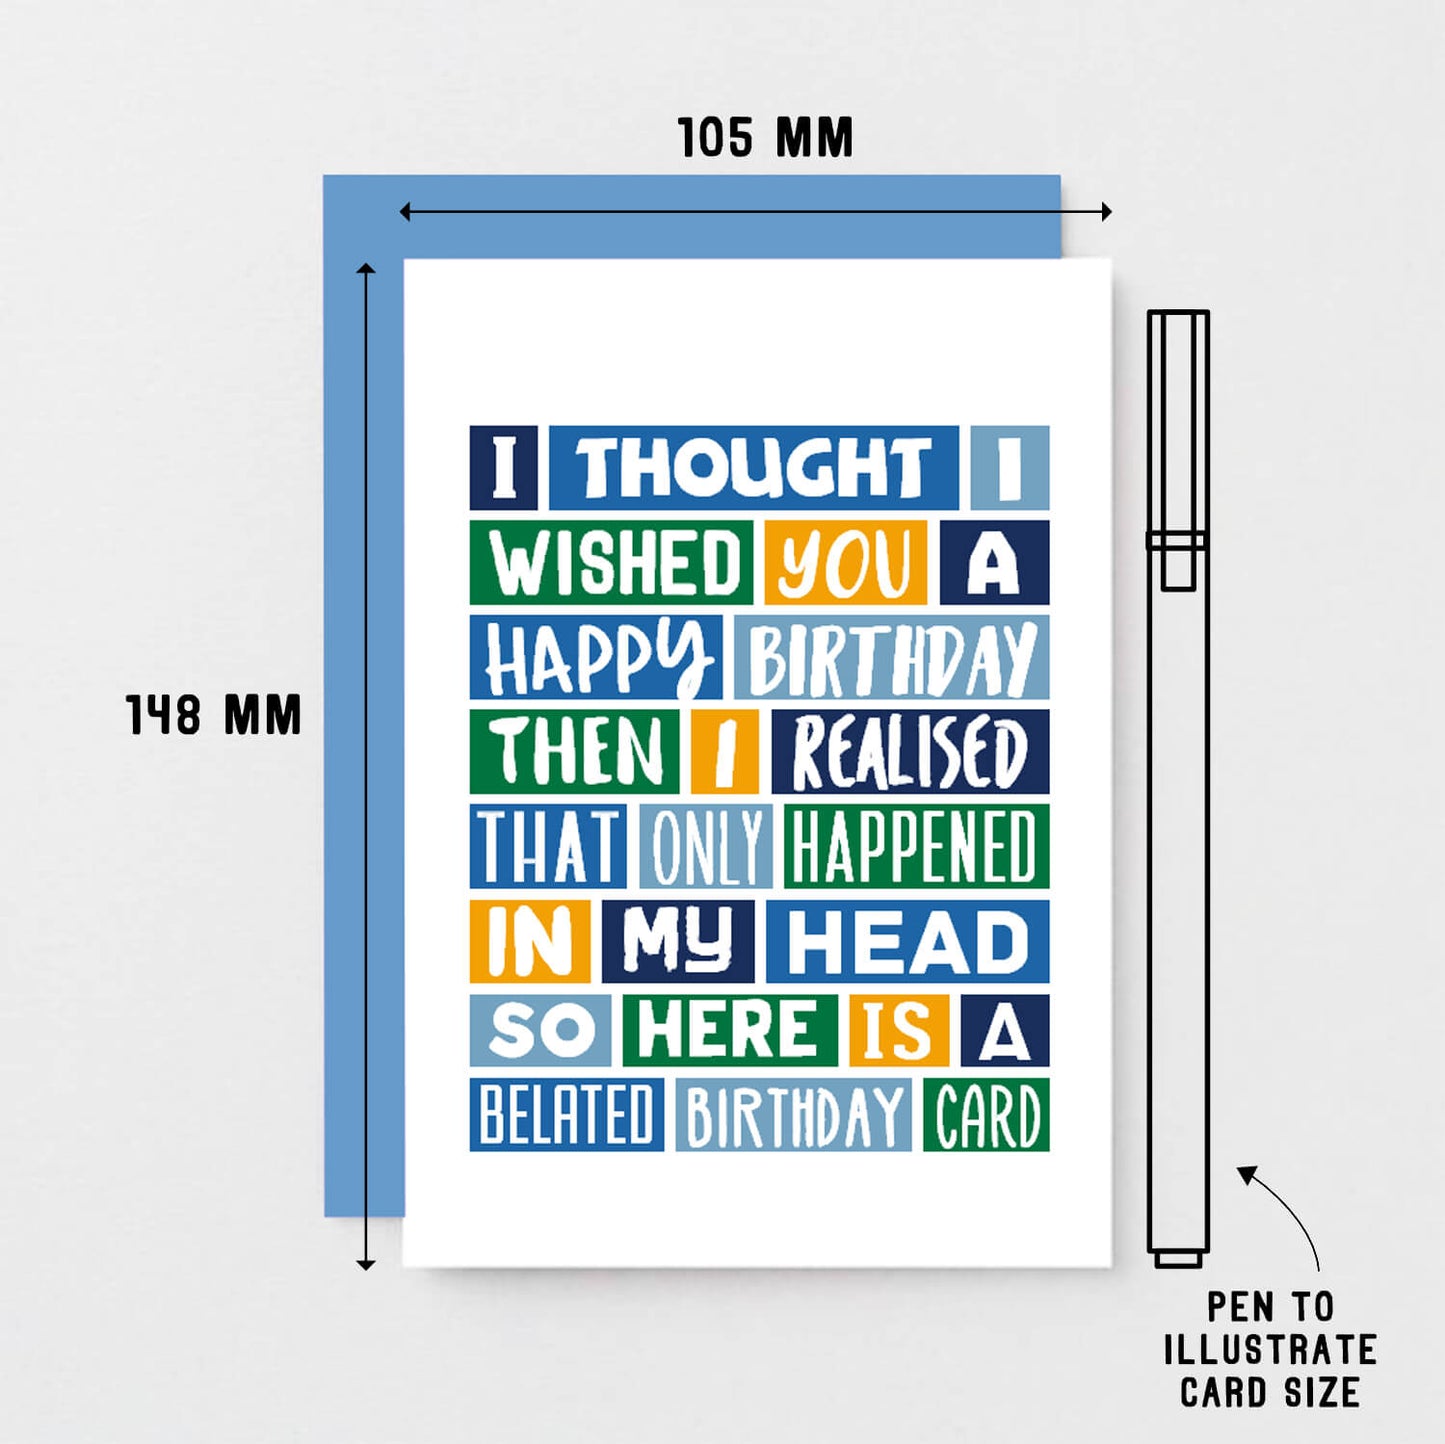 Belated Birthday Card by SixElevenCreations. Reads I thought I wished you a happy birthday then I realised that only happened in my head. So here is a belated birthday card. Product Code SE0093A6